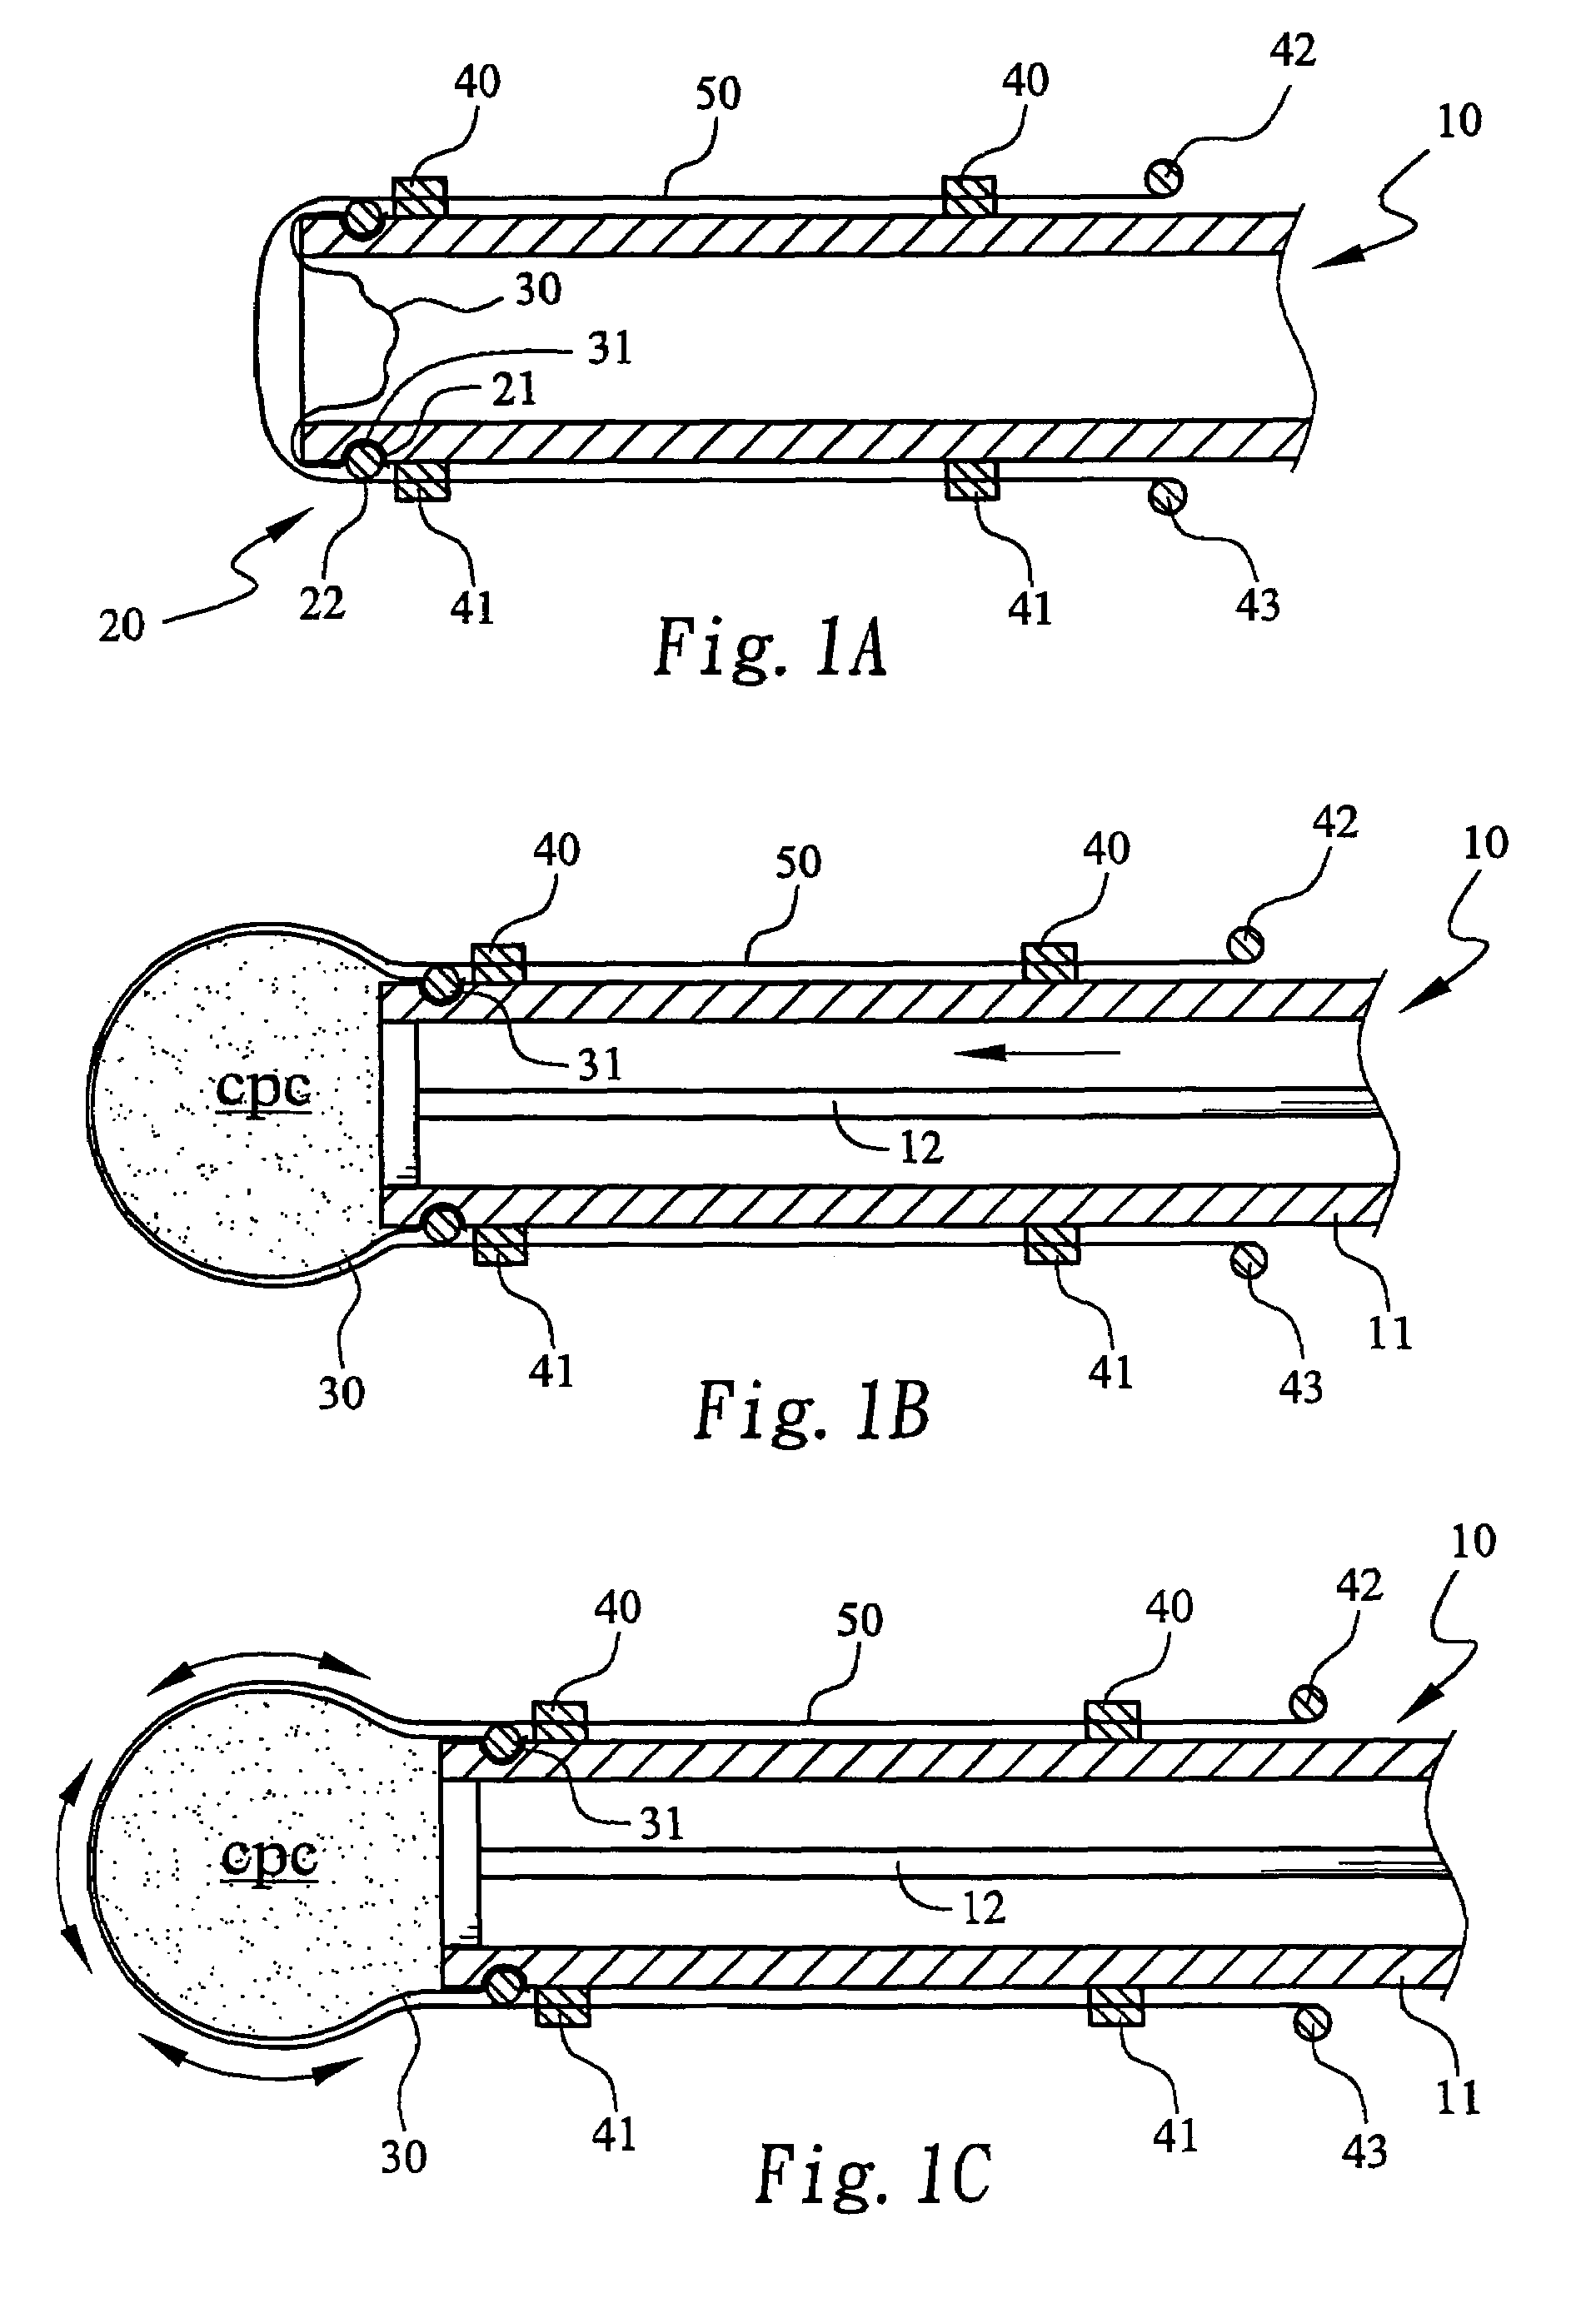 Method for forming a hardened cement in a bone cavity